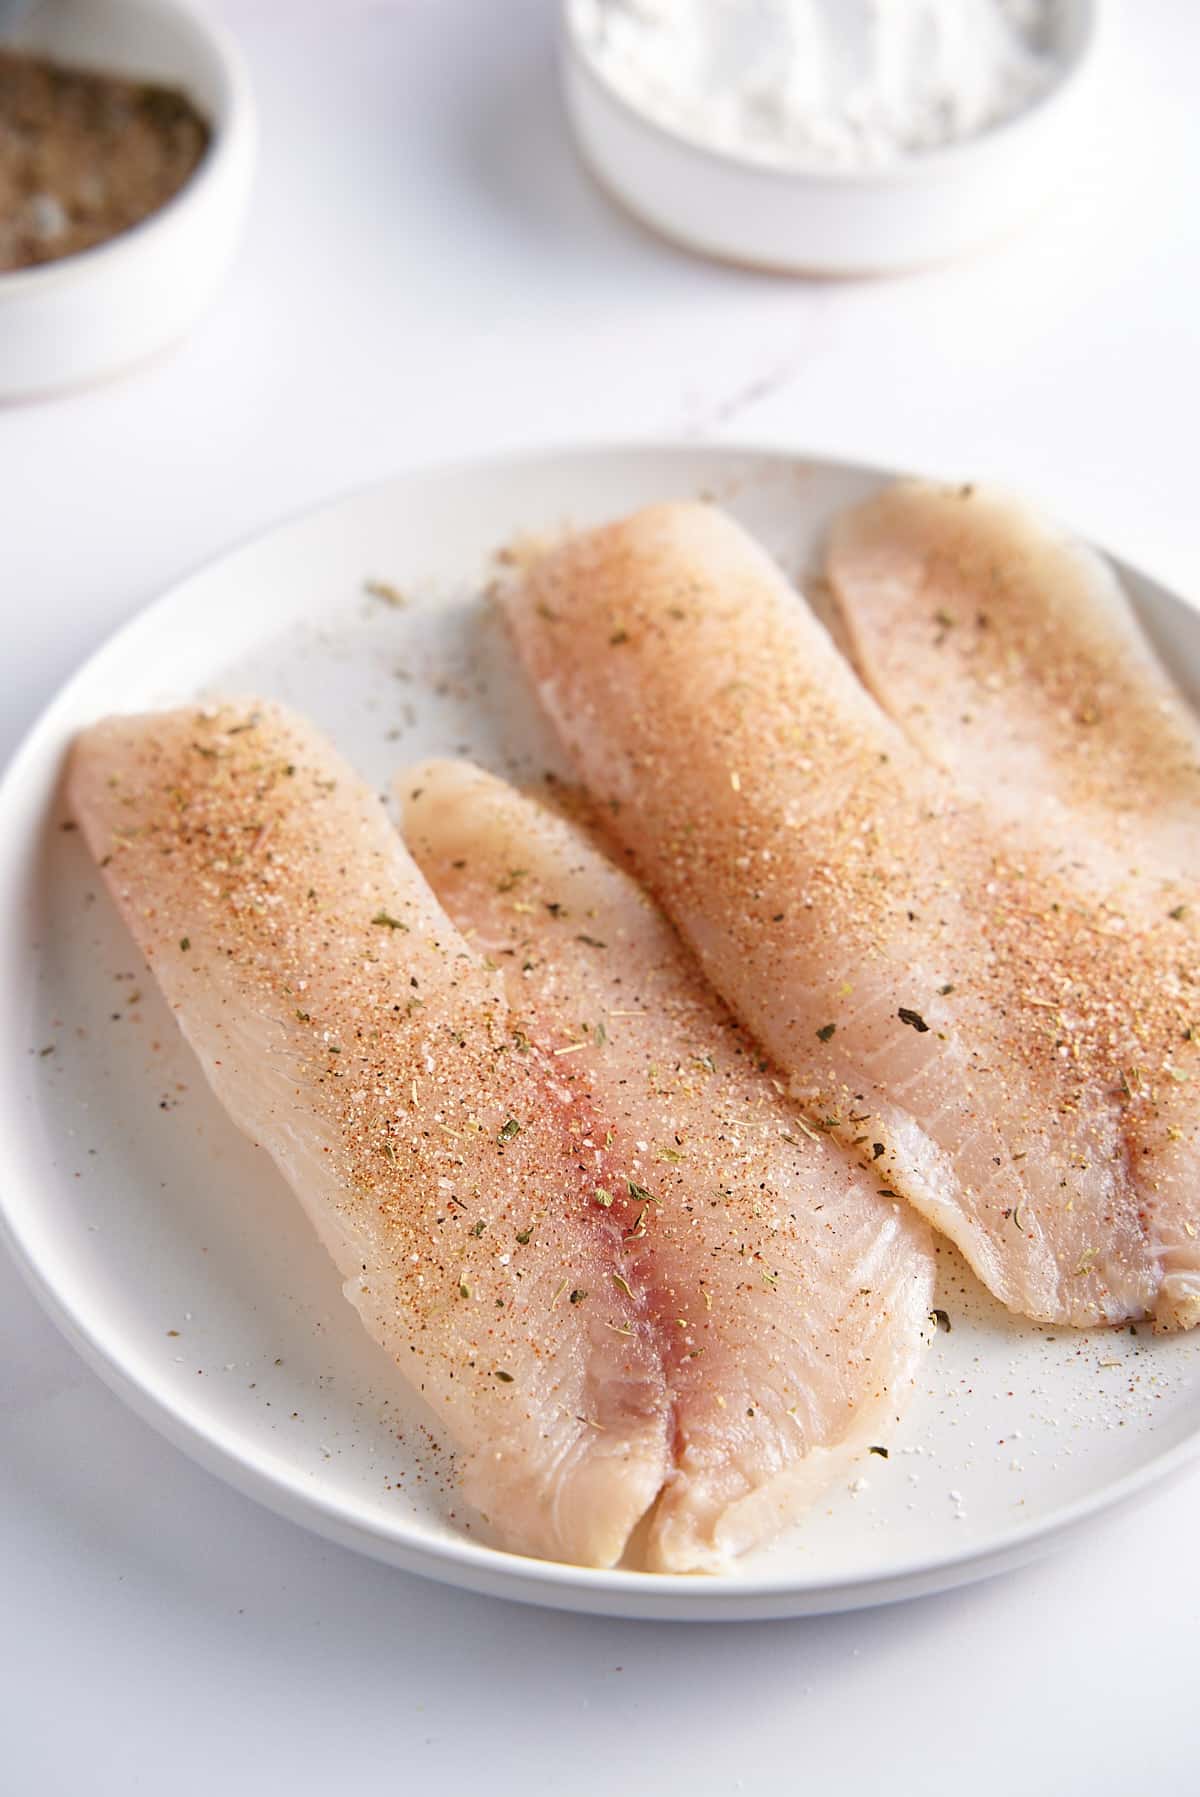 A plate with 2 seasoned white fish filets.